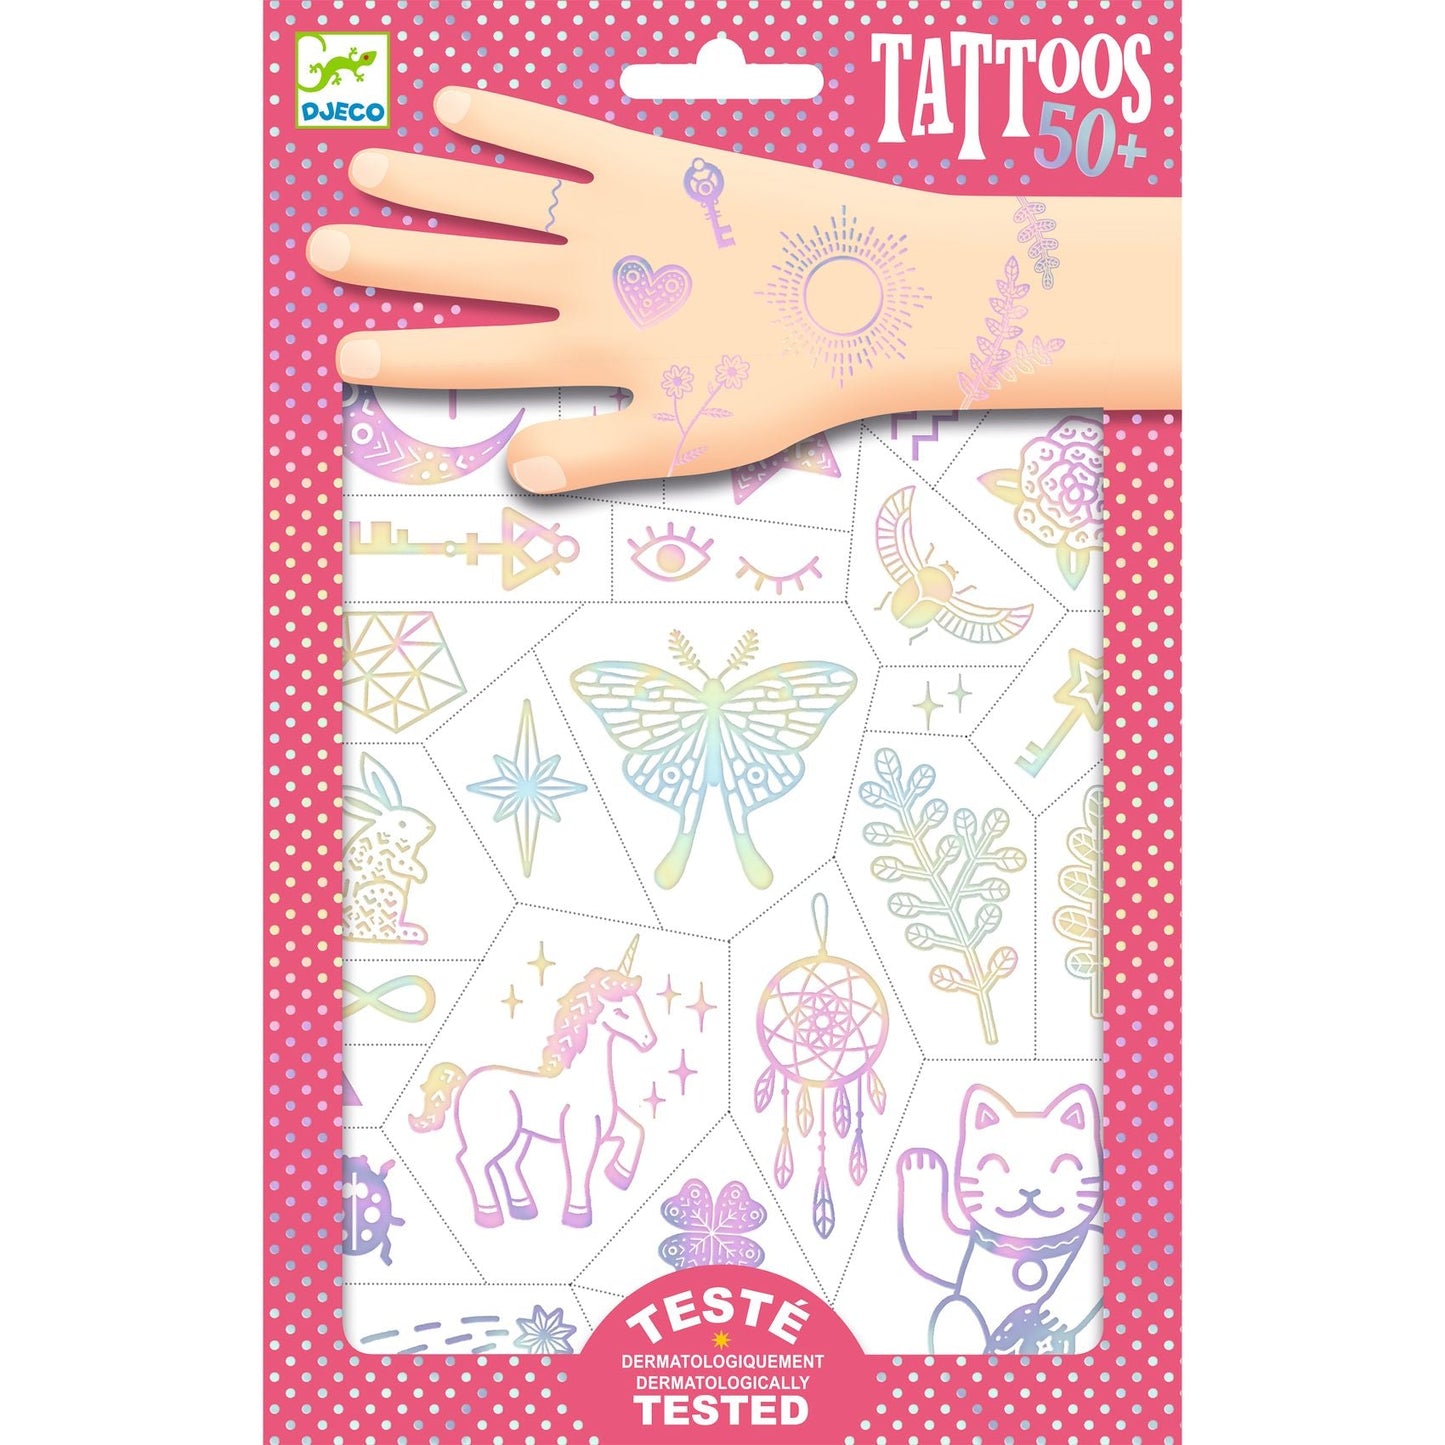 Tattoos | Lucky Charms-Djeco-Super Châtaigne-Imagination : Product type